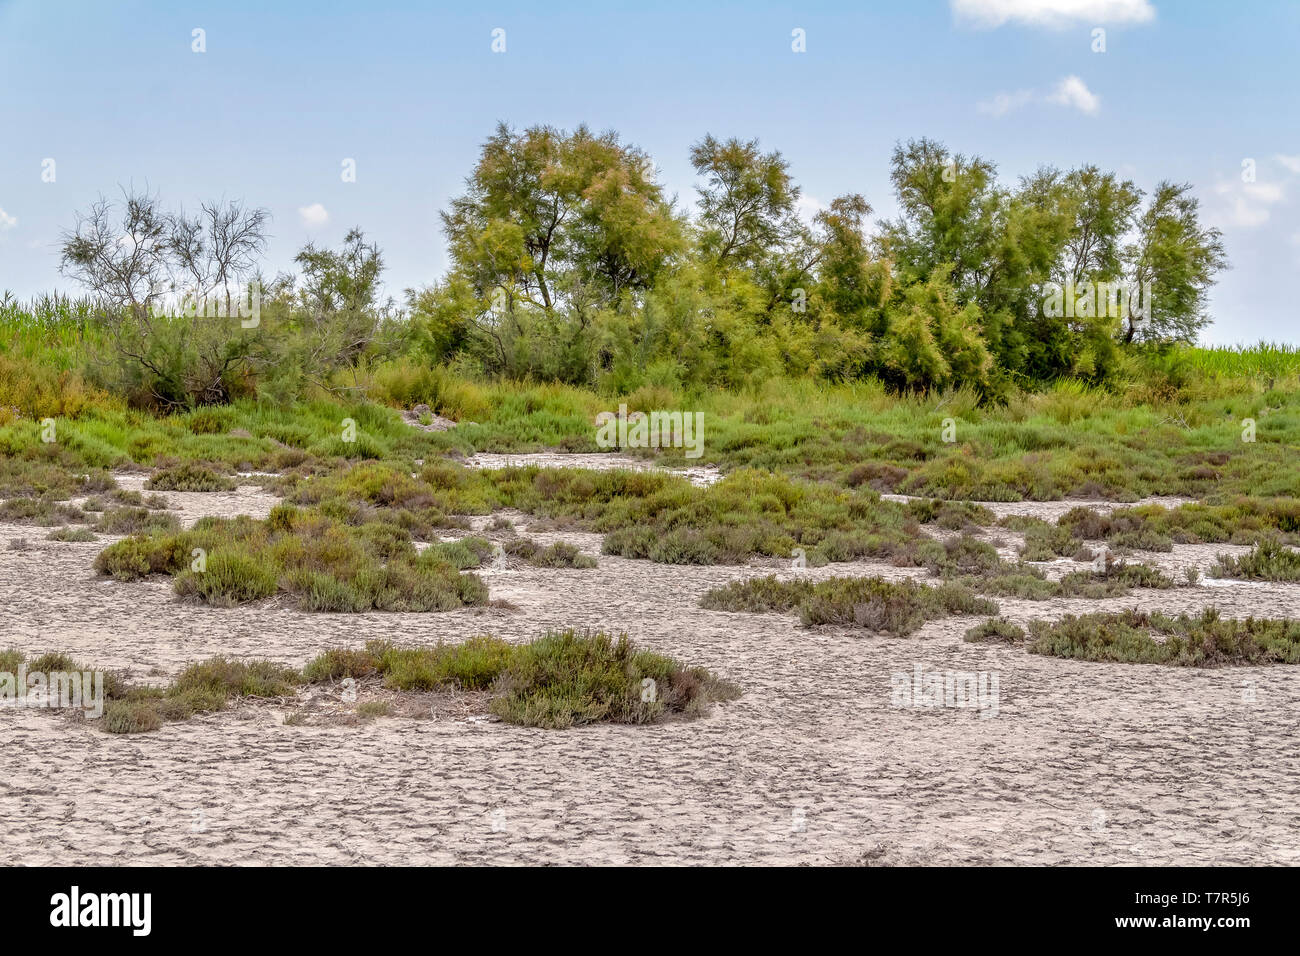 vegetation scenery around the Regional Nature Park of the Camargue in Southern France Stock Photo